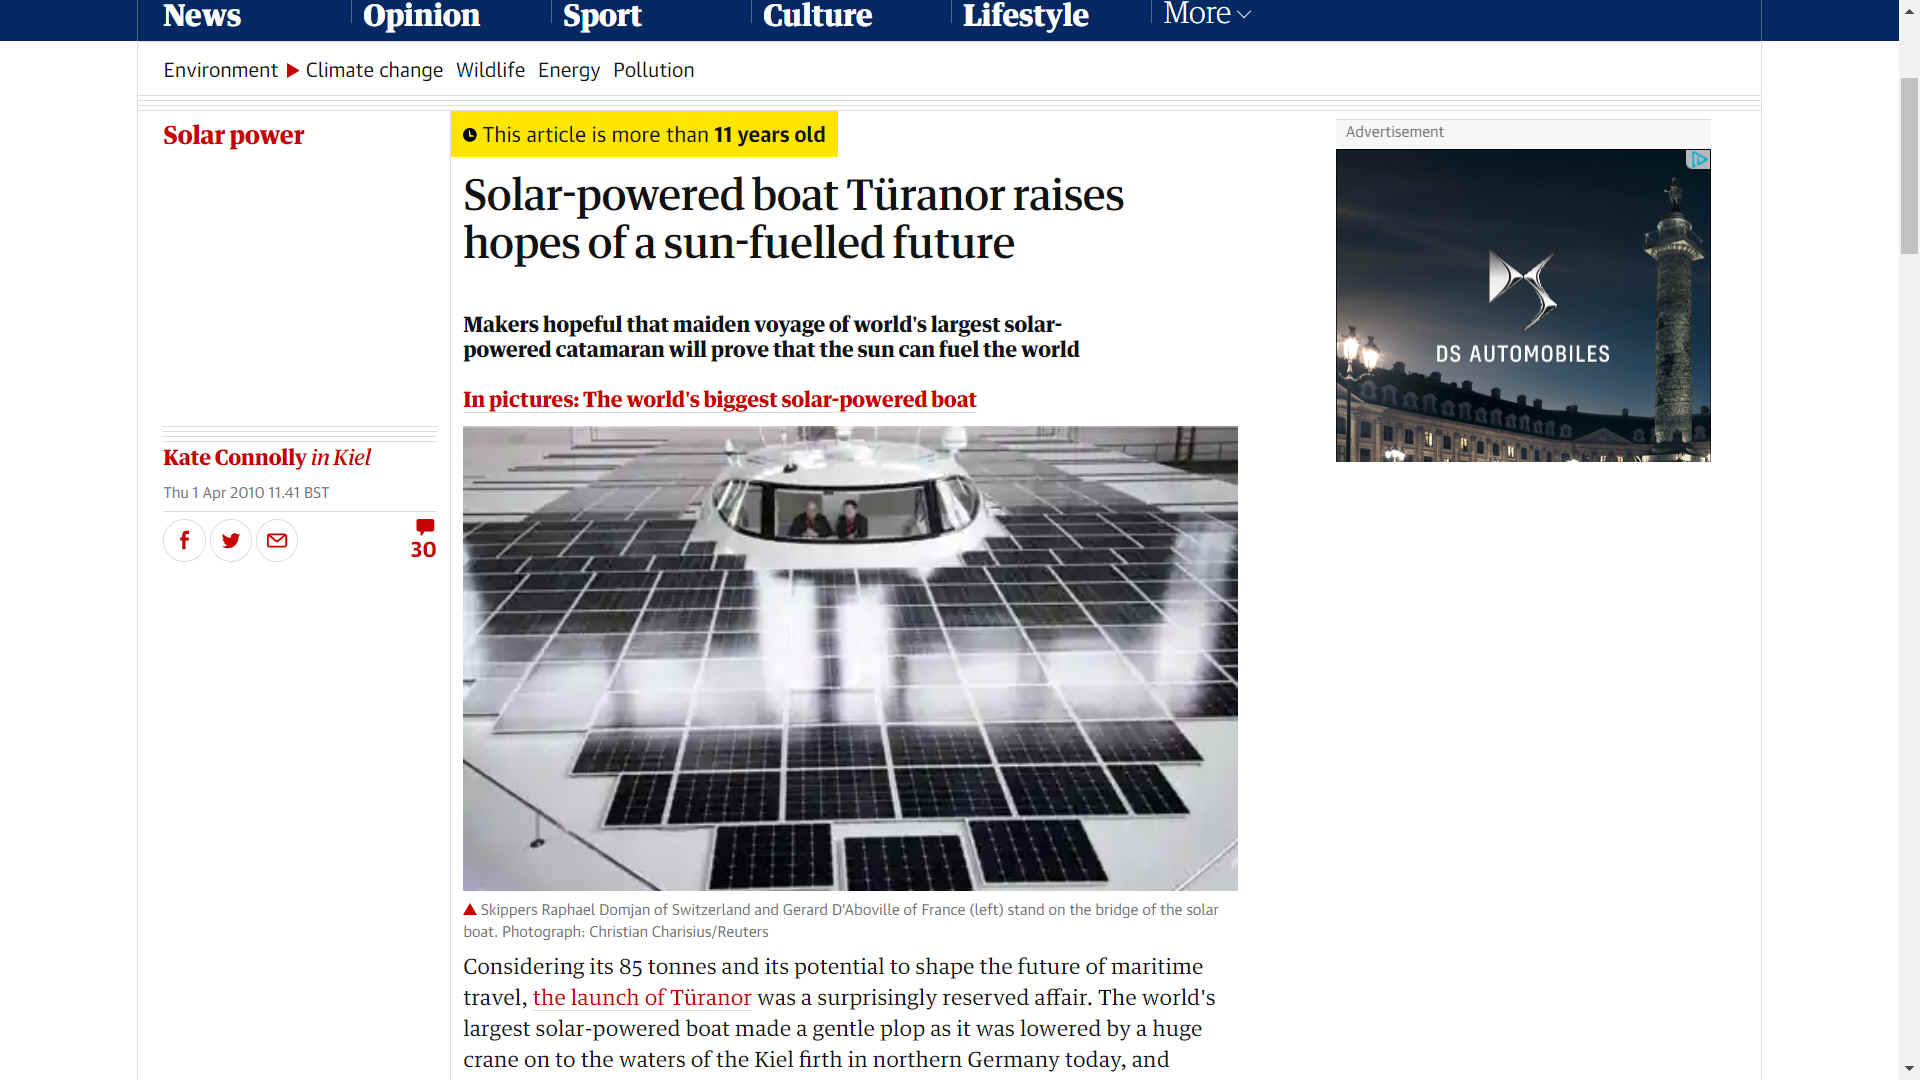 The Guardian 1st April 2010 launch of solar boat PlanetSolar Germany